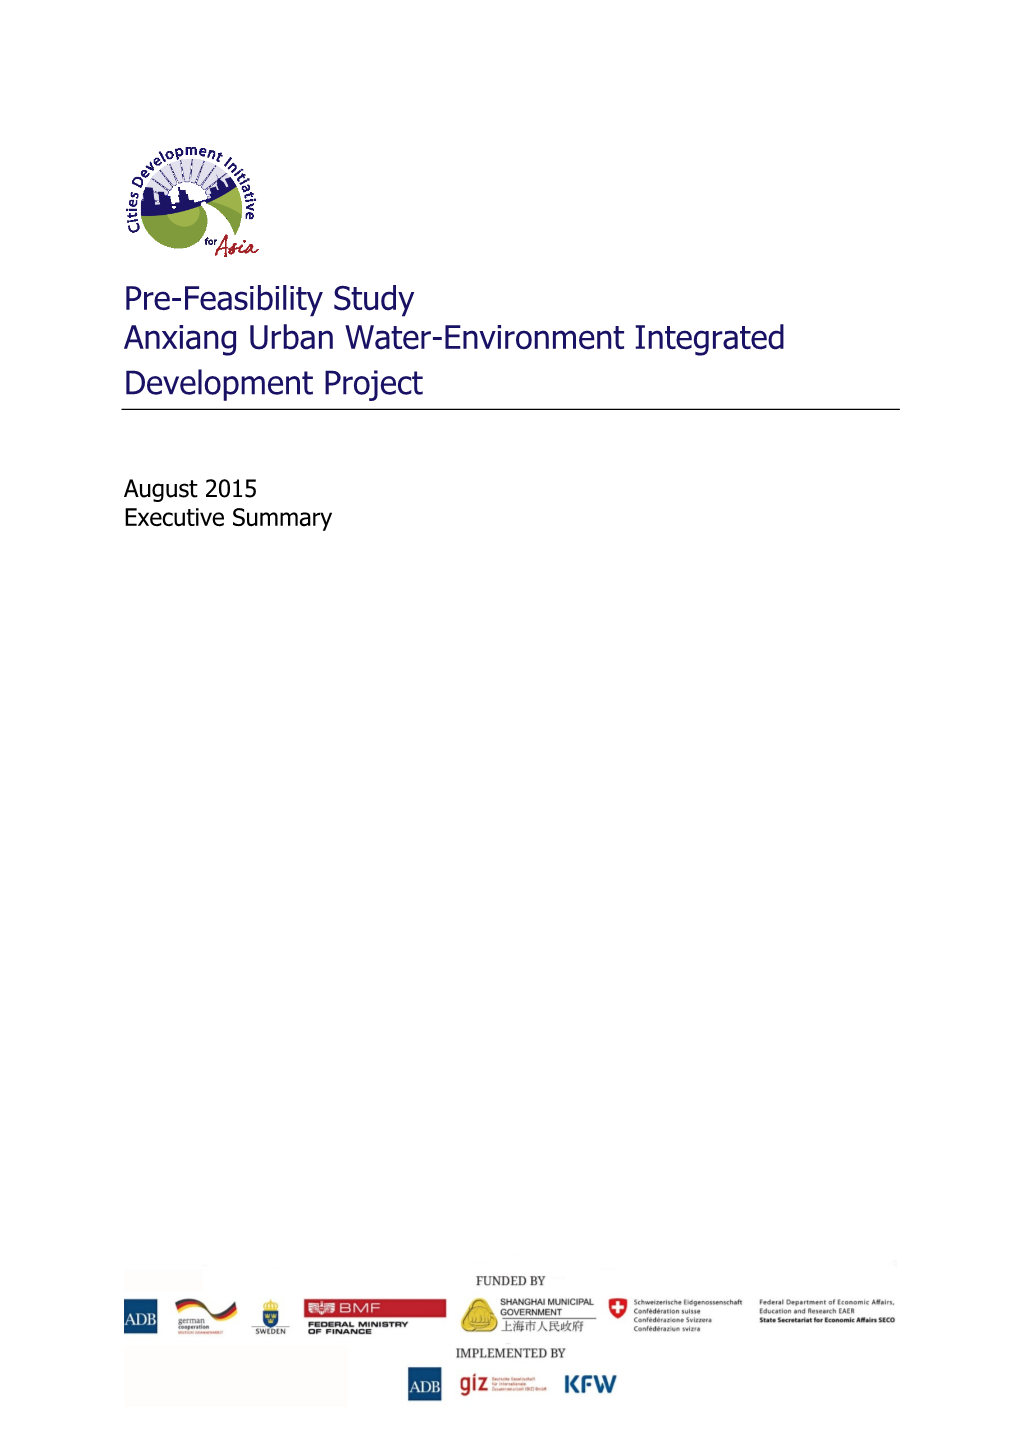 Pre-Feasibility Study Anxiang Urban Water-Environment Integrated Development Project